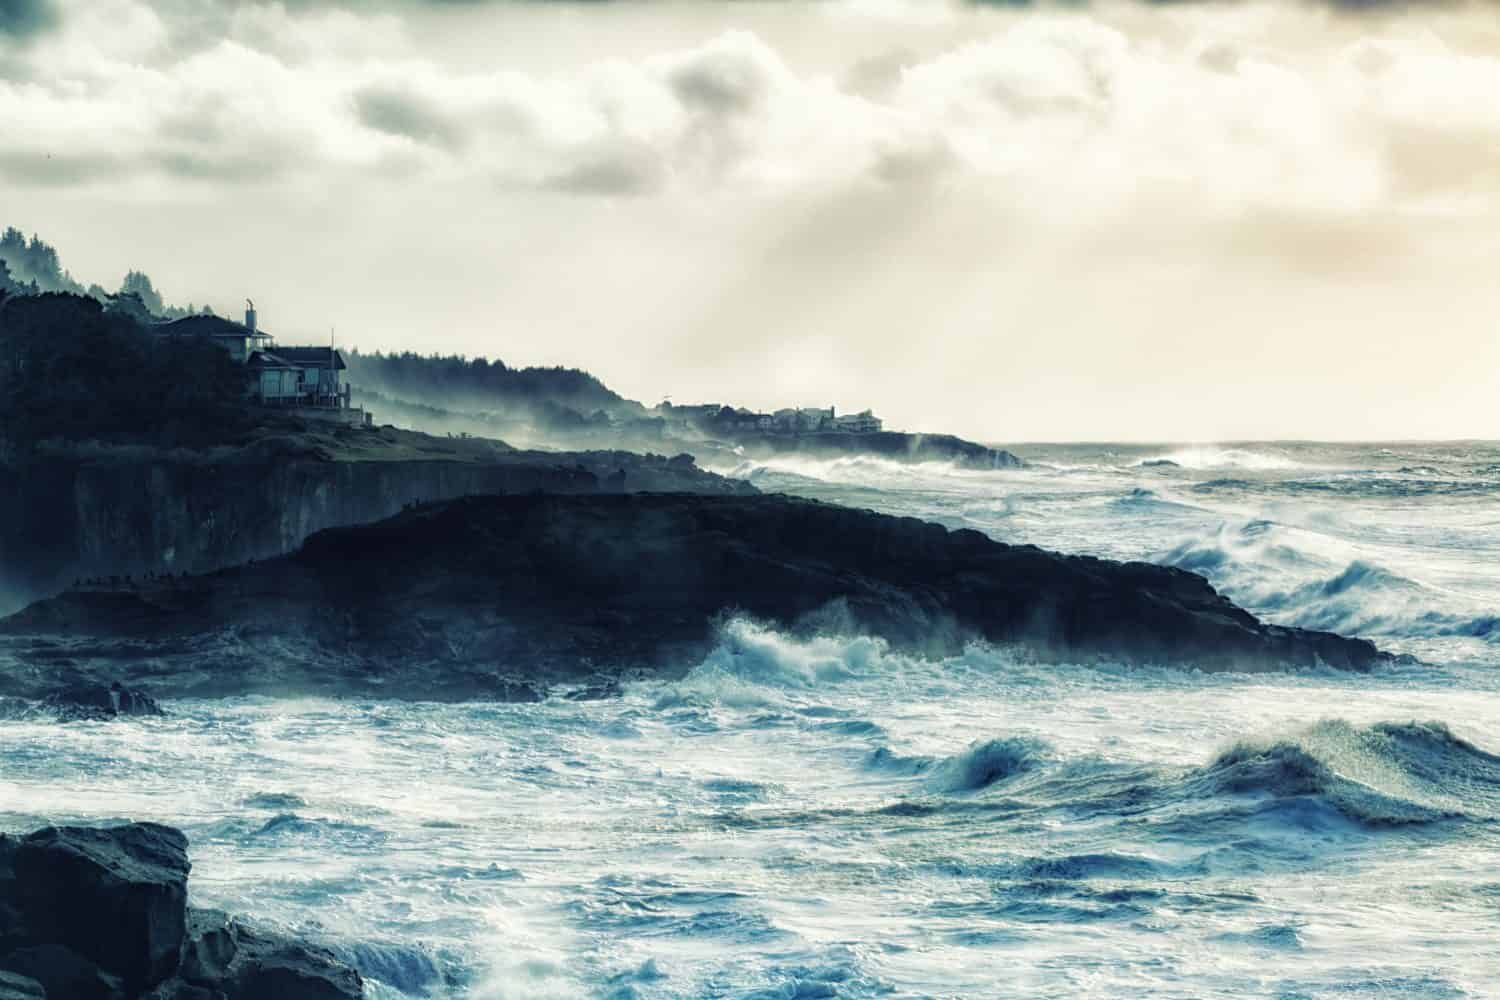 Artistic impression and rendering of rough and rugged Oregon Coast.  Photograph has been intentionally manipulated to present a vintage, painterly effect.